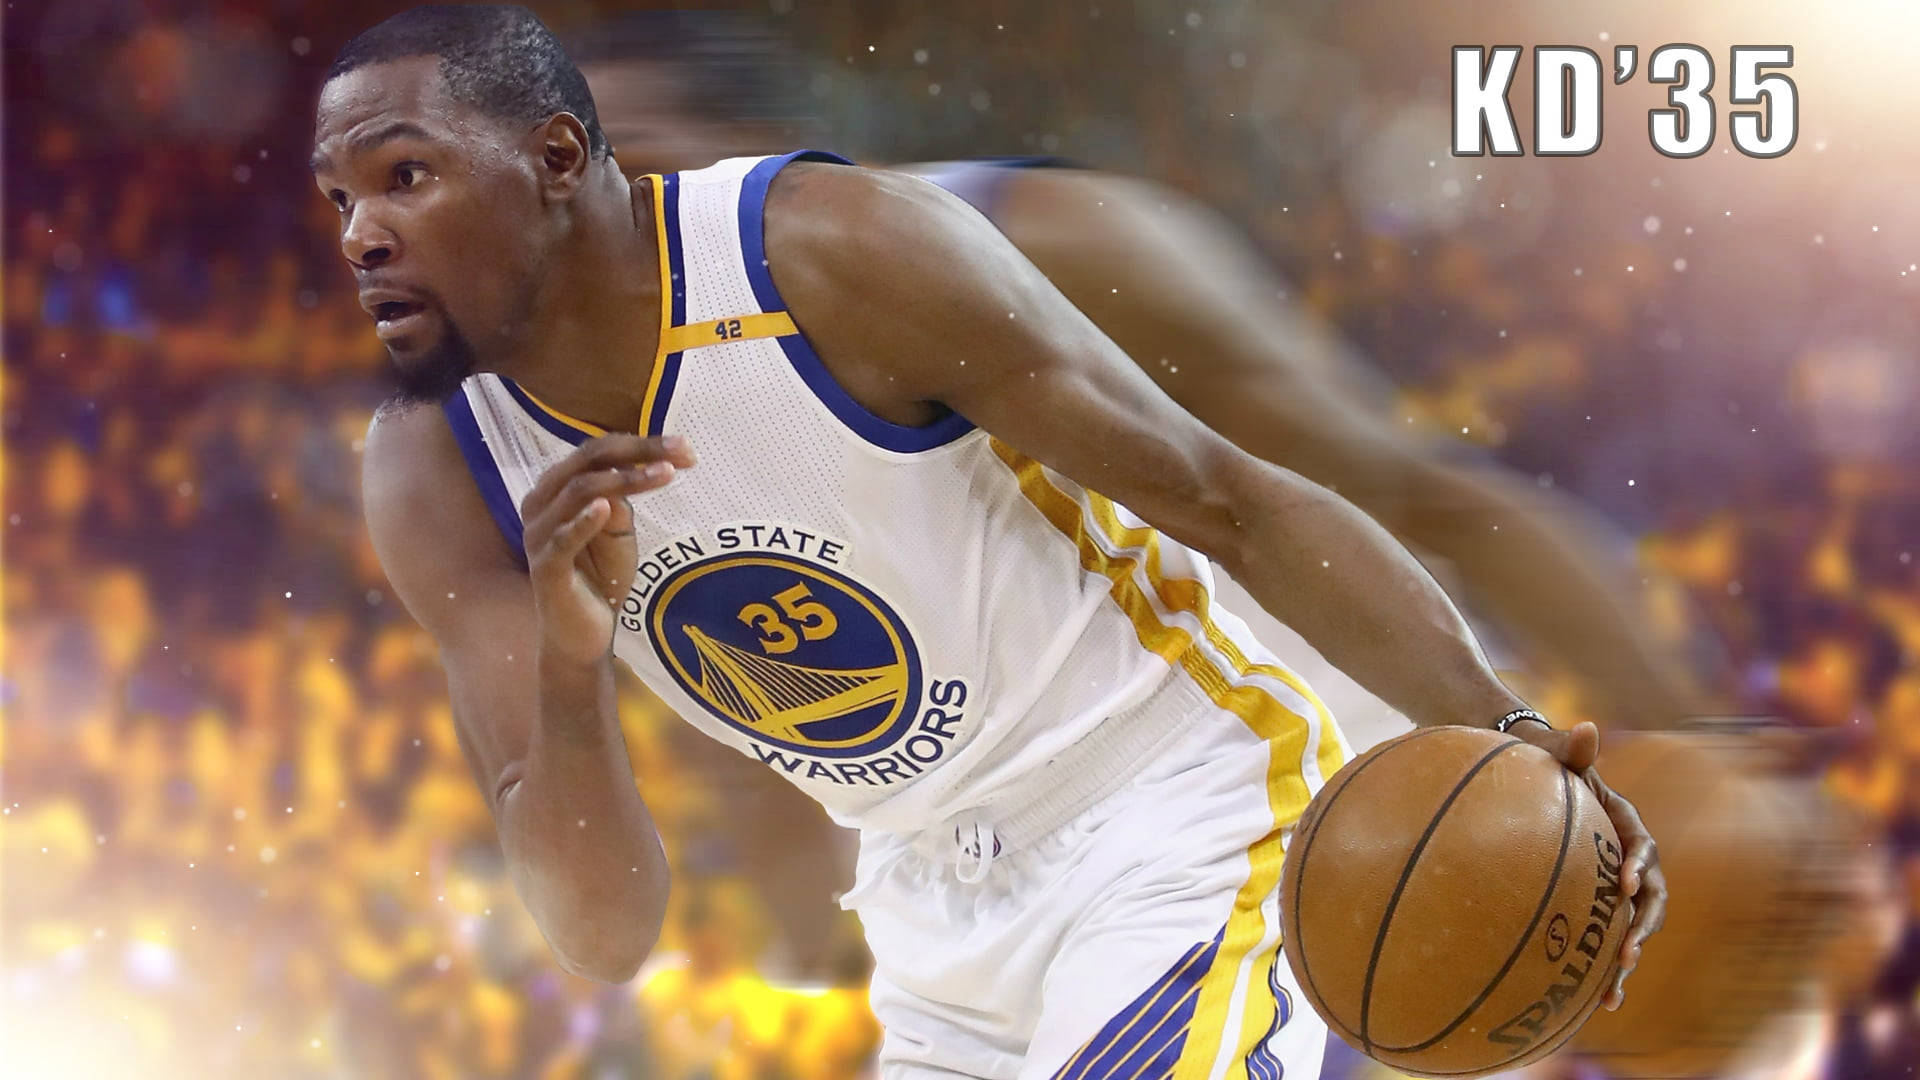 Kevin Durant Player Number 35 Background